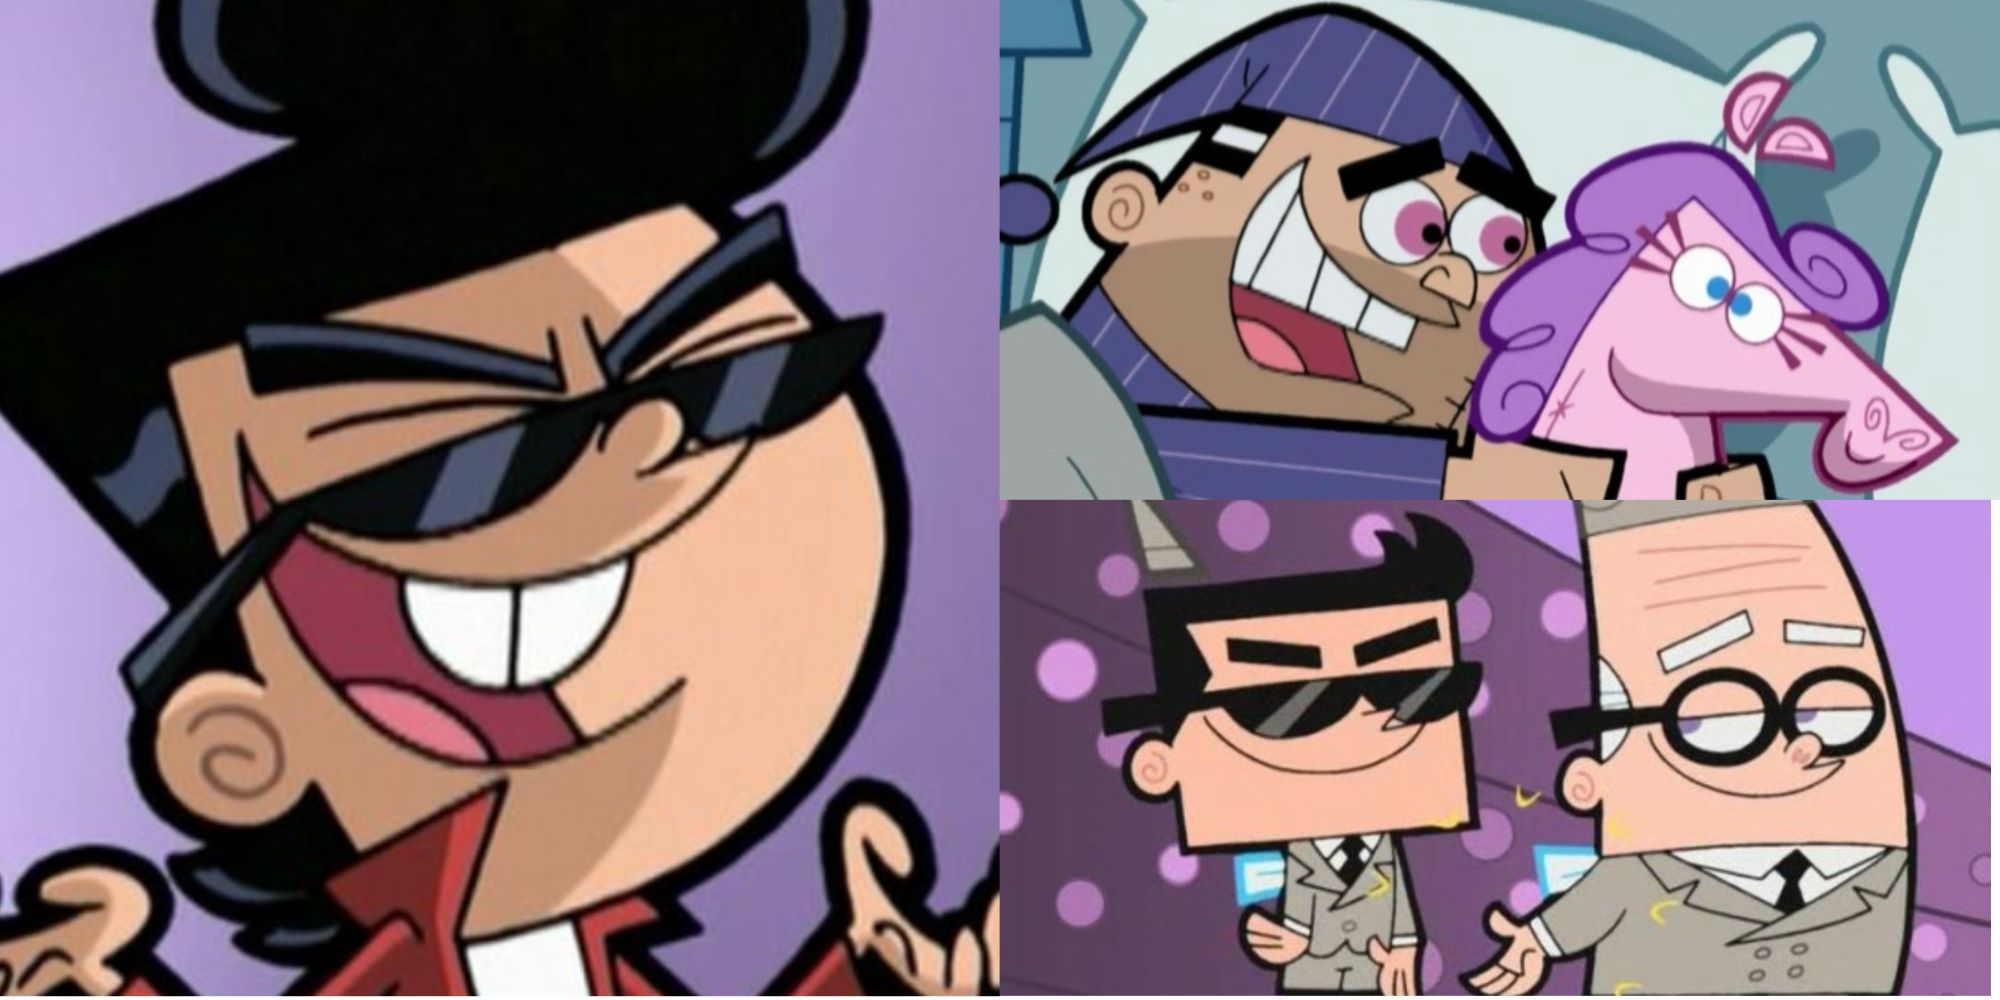 Gary, Big Daddy, and the Pixies from The Fairly OddParents.